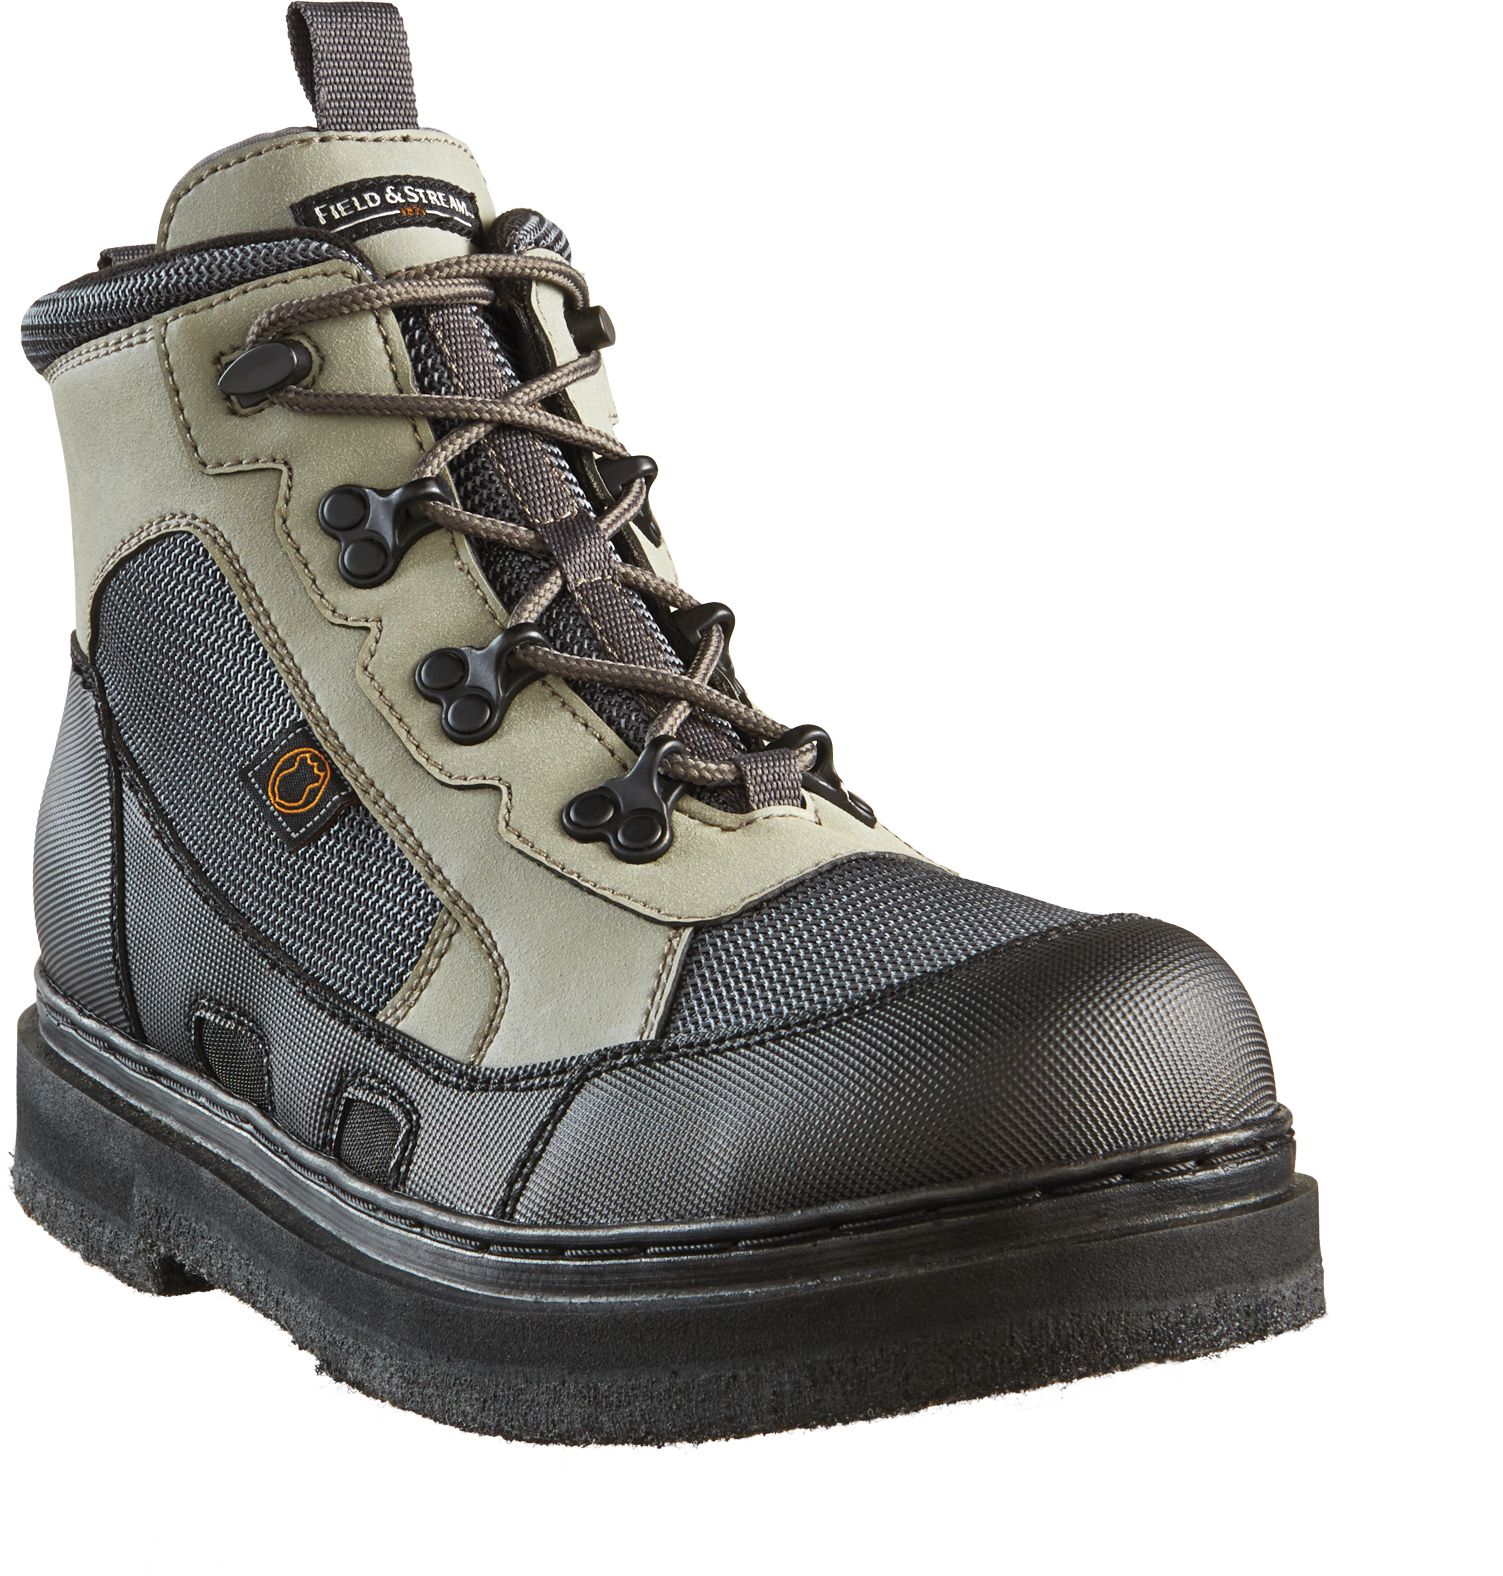 Wading Boots & Shoes | DICK'S Sporting Goods